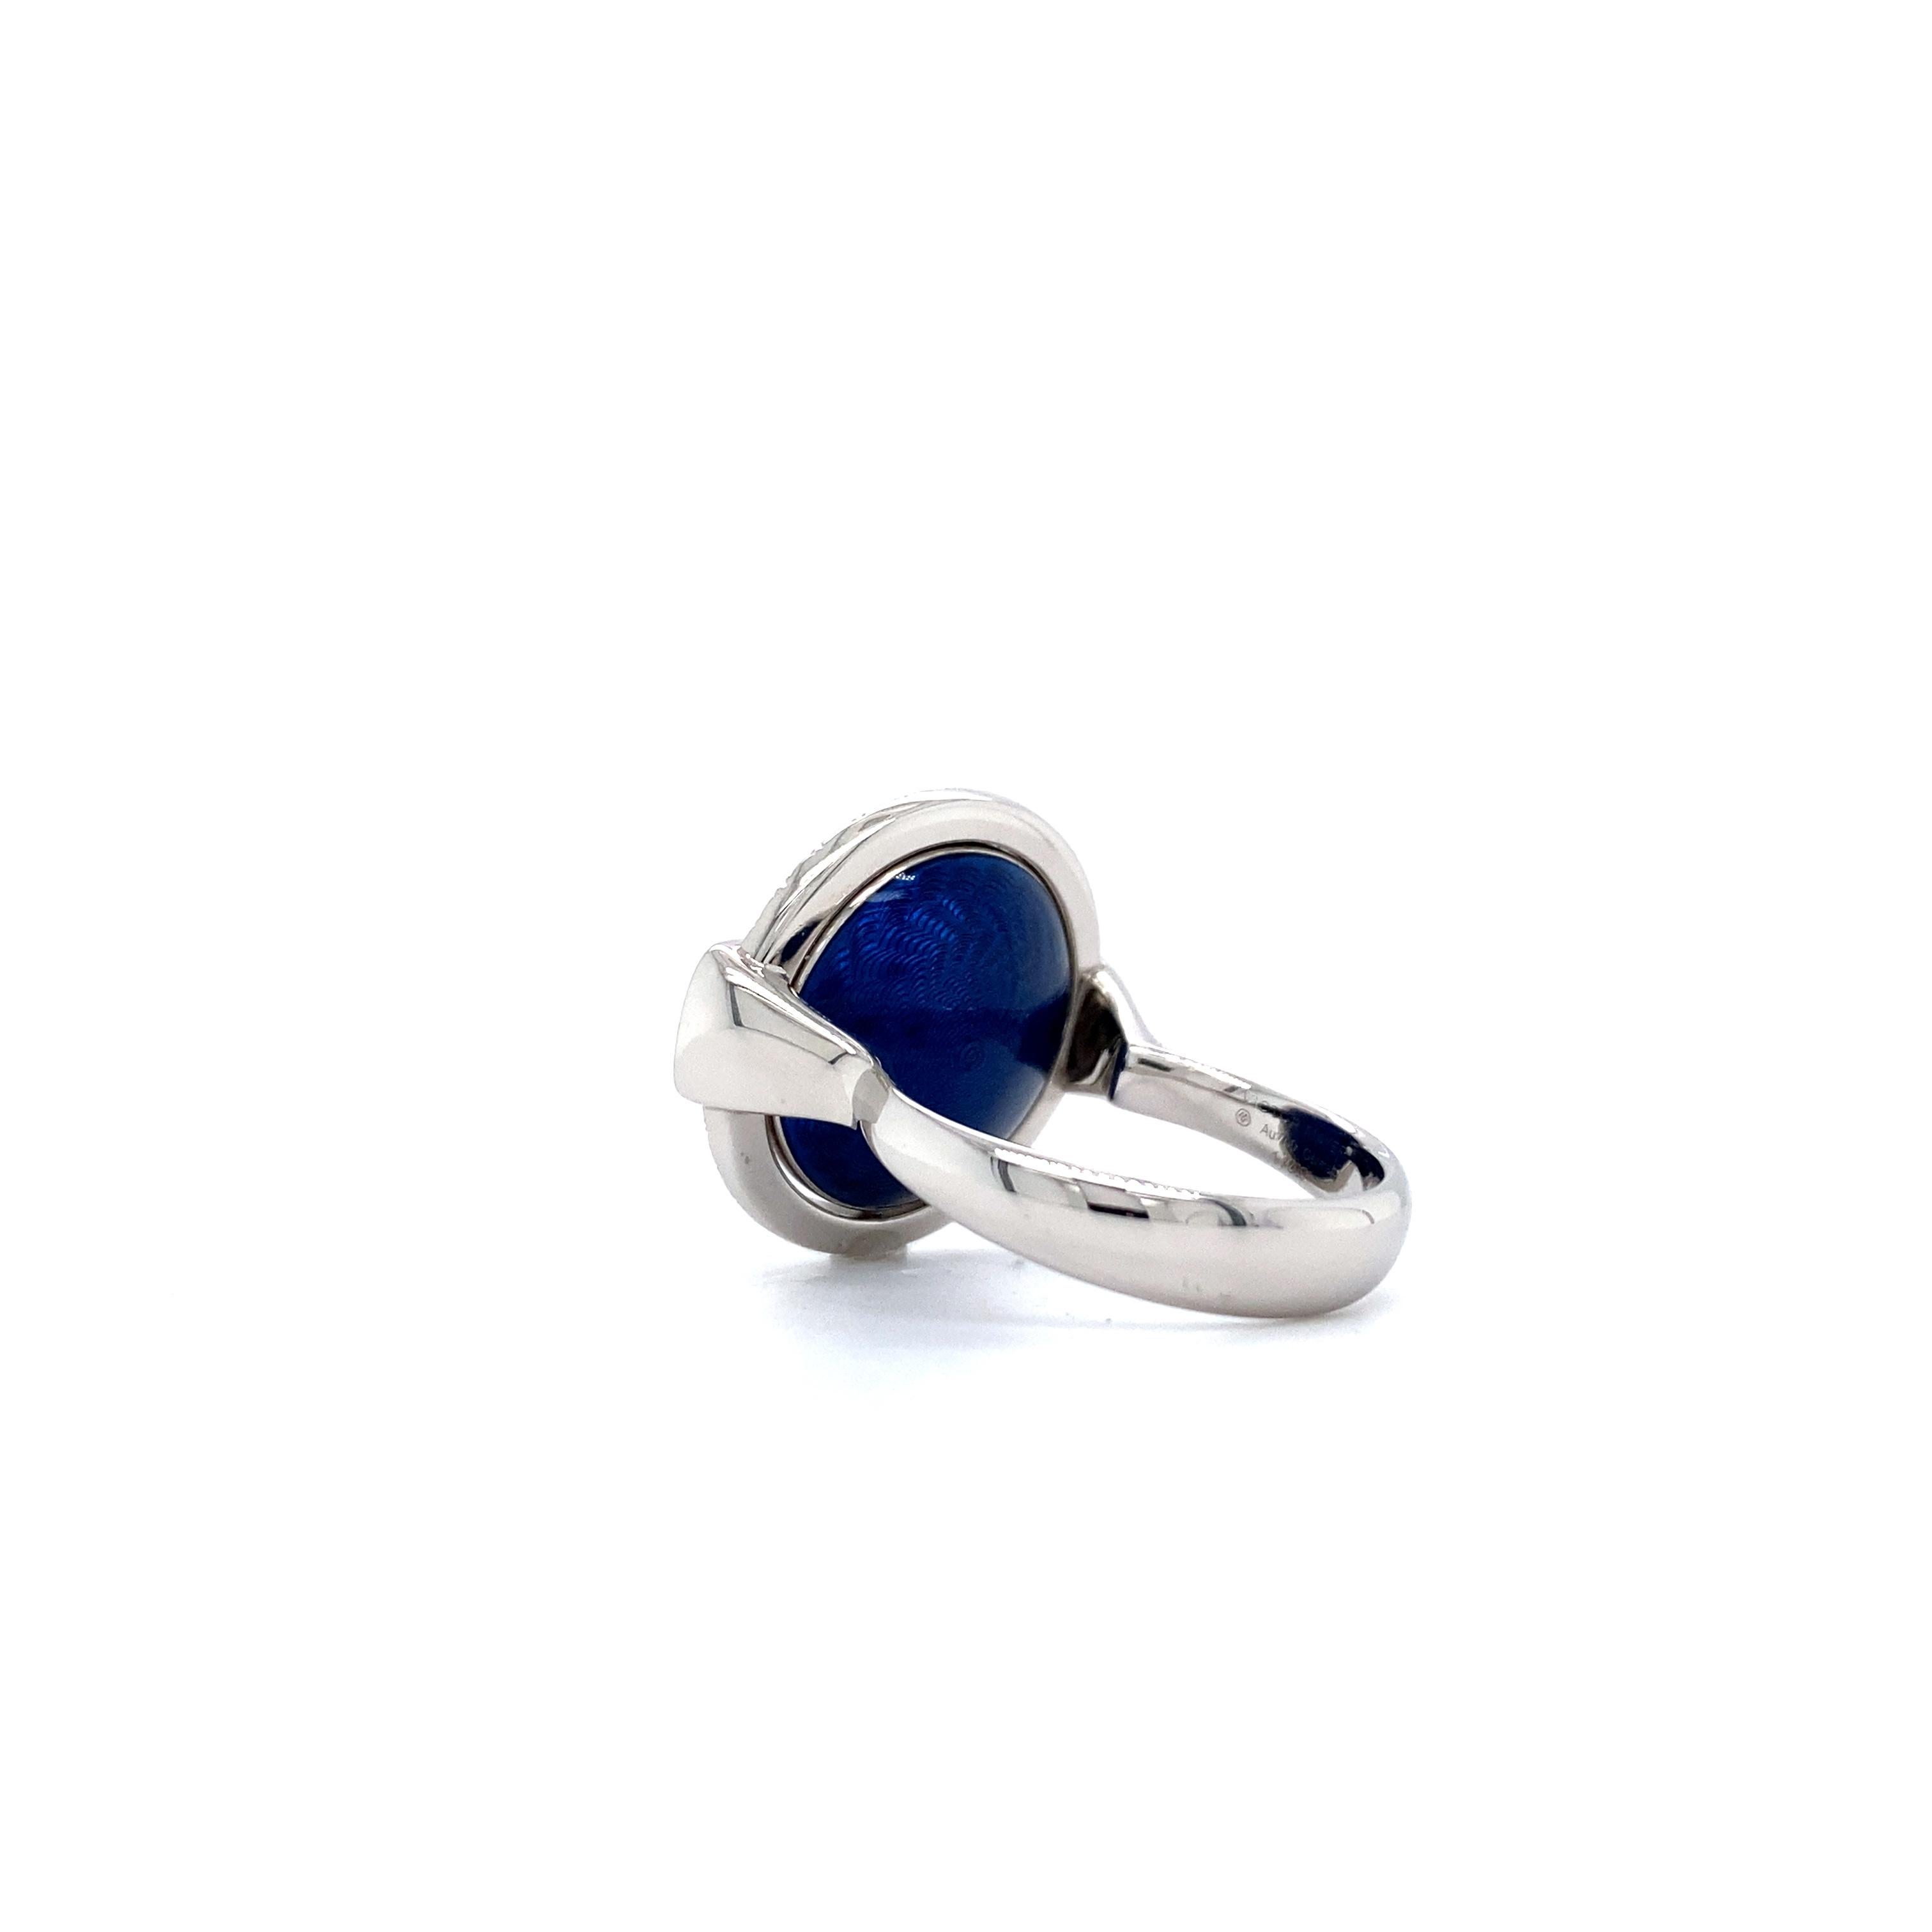 Victor Mayer Ring Candy Silver Blue Enamel 18k White Gold 78 Diamonds 0.47 ct For Sale 1